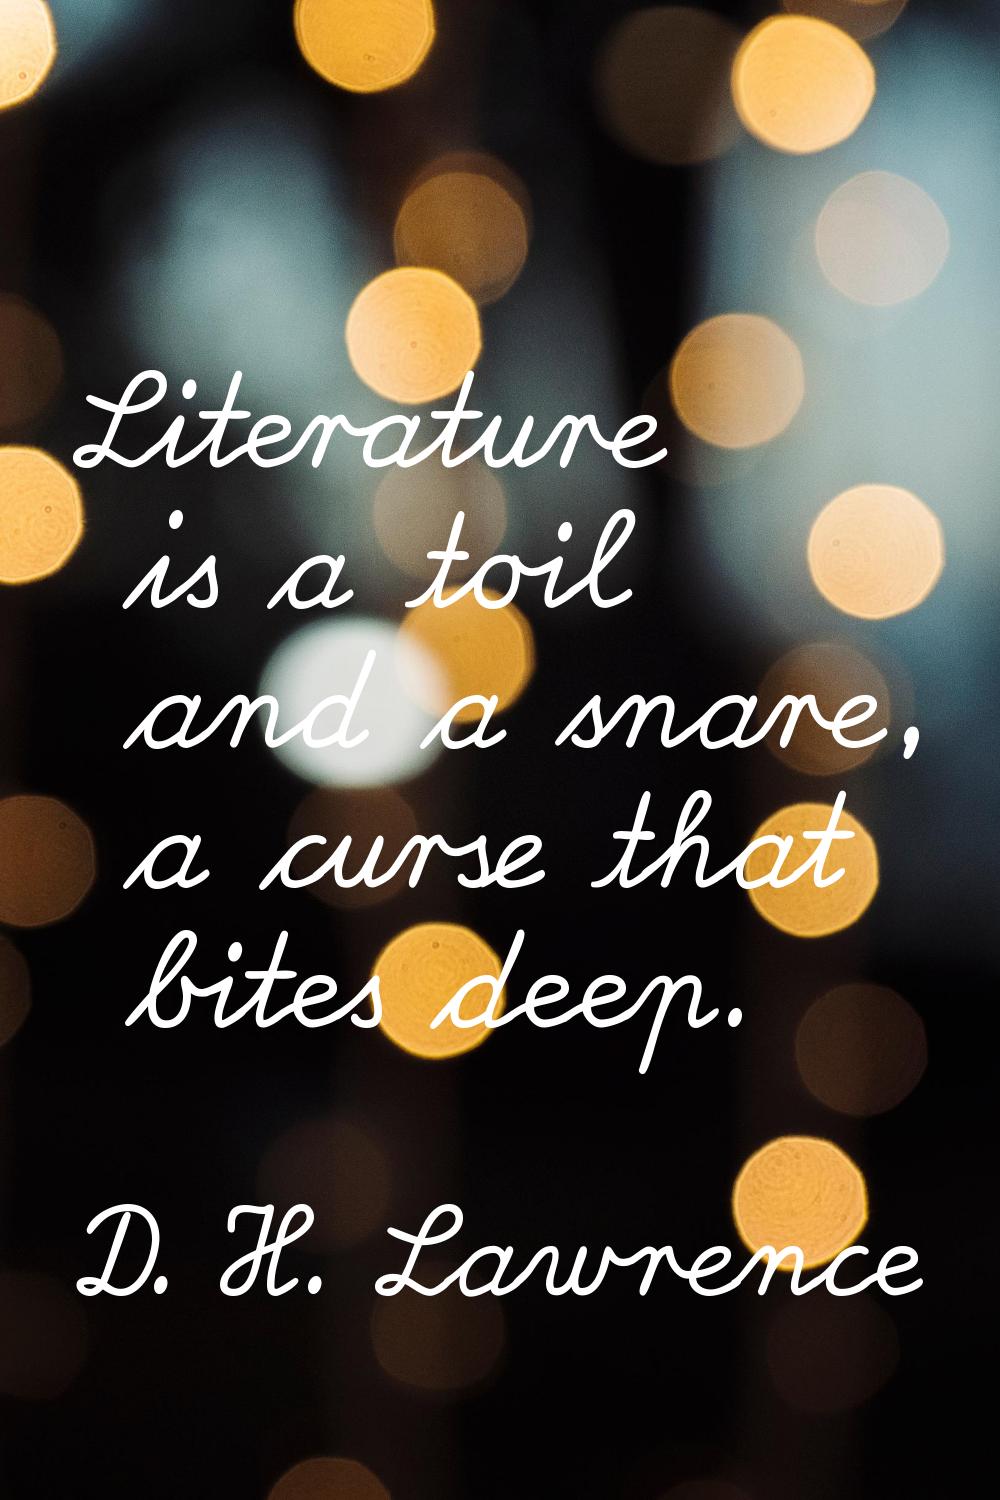 Literature is a toil and a snare, a curse that bites deep.